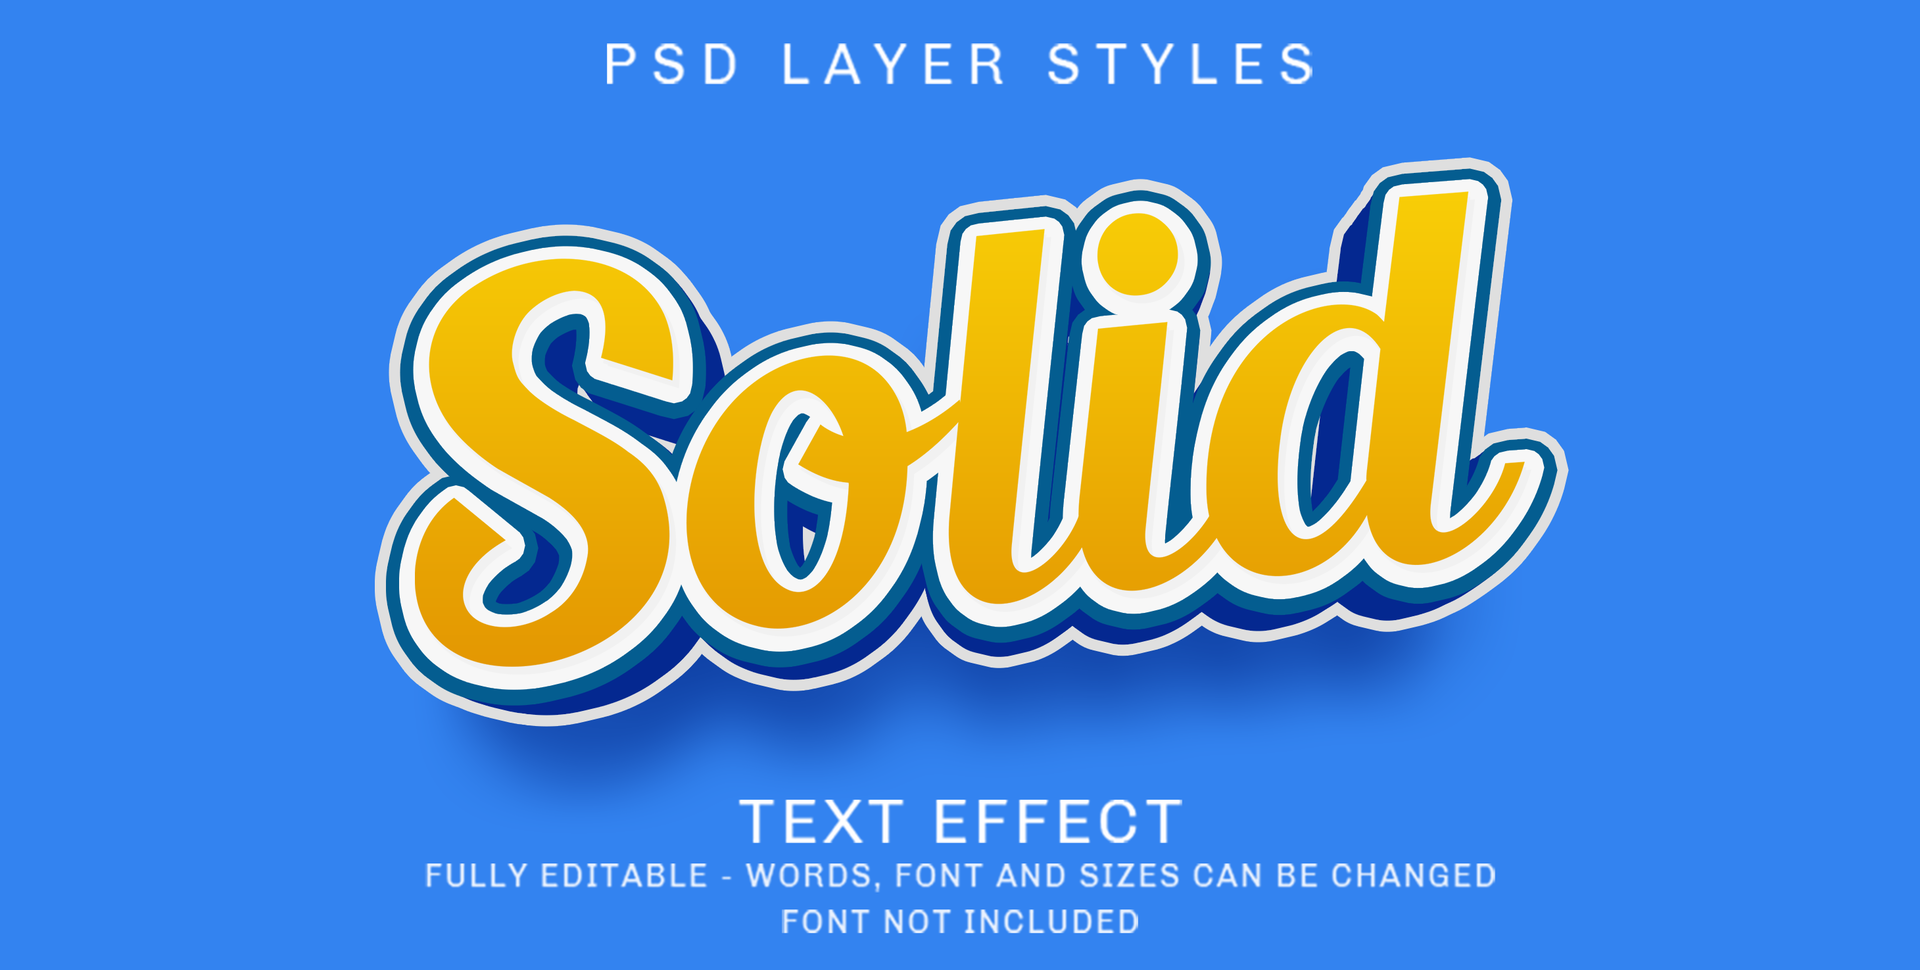 3d solid - editable text style effect psd